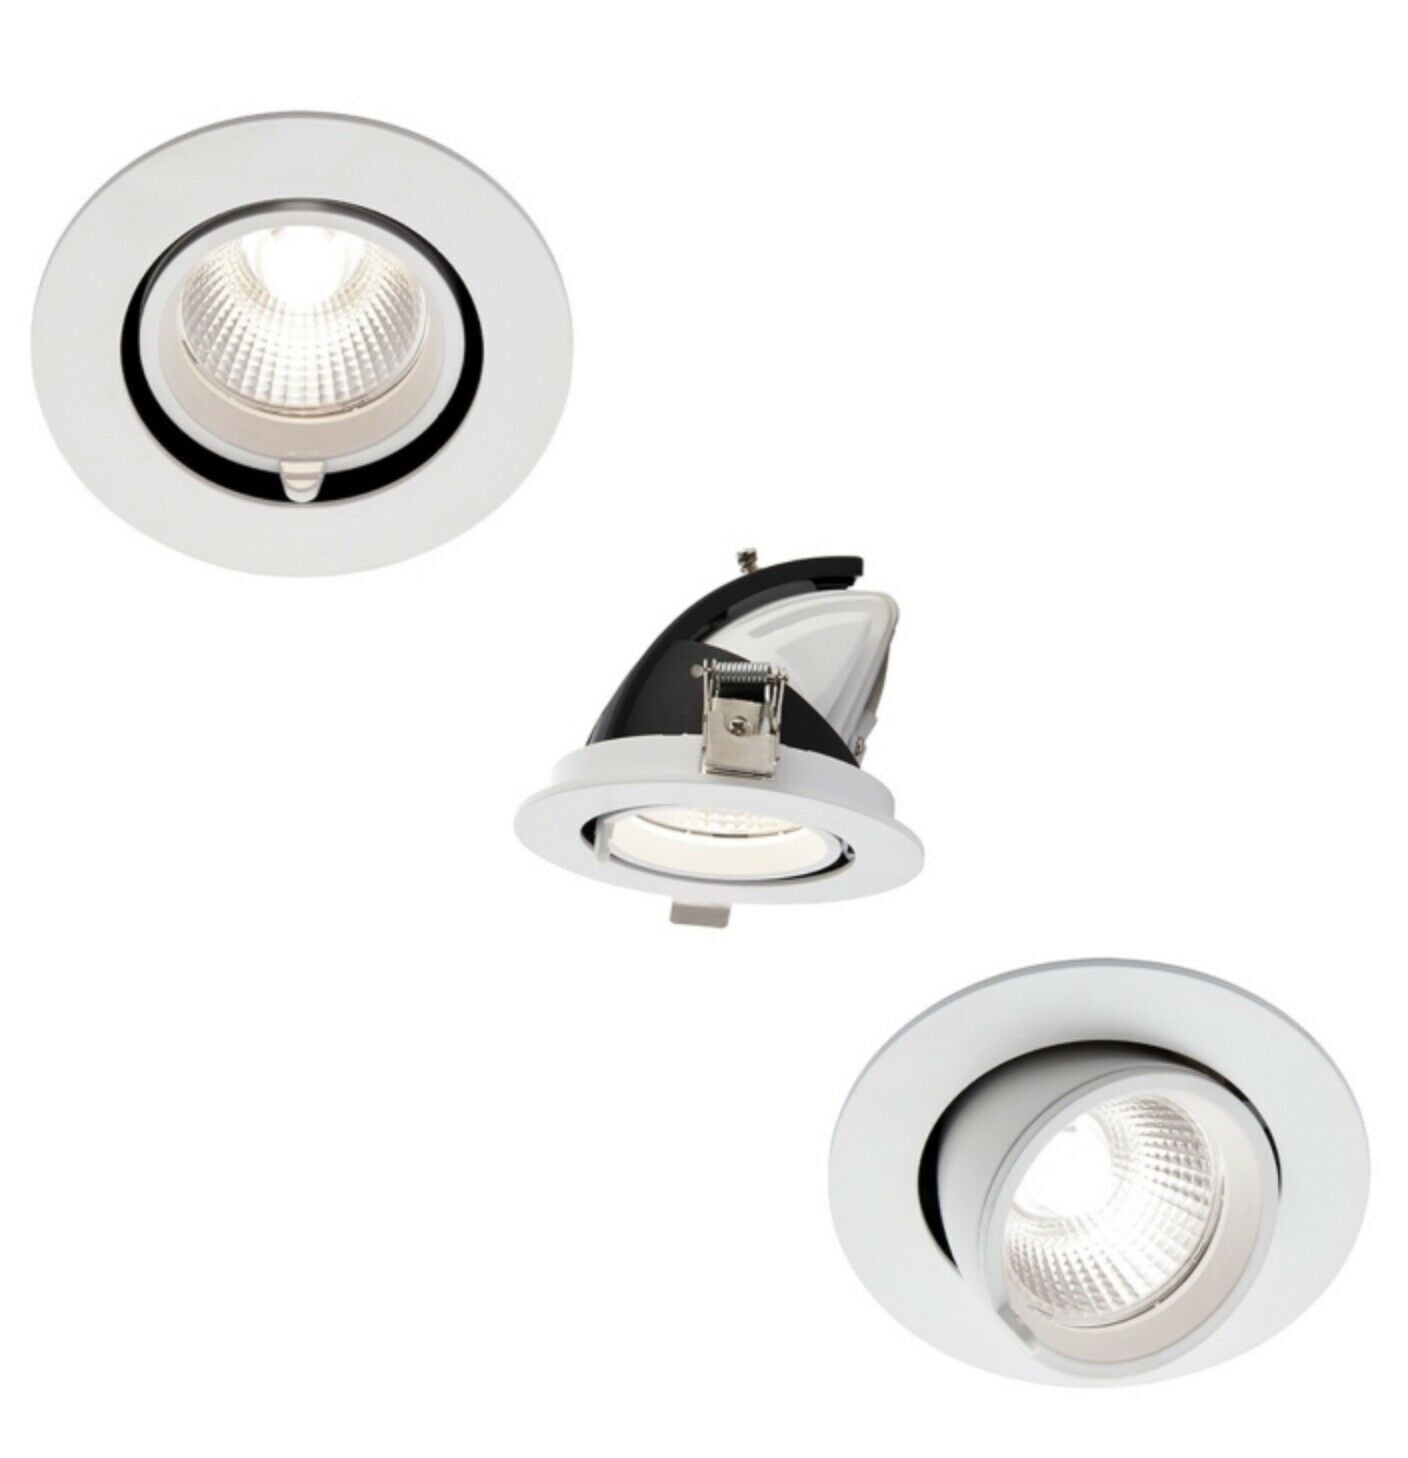 Illuminate Your Home or Business Renovation with Thrulight Downlight and IP65 Light Products